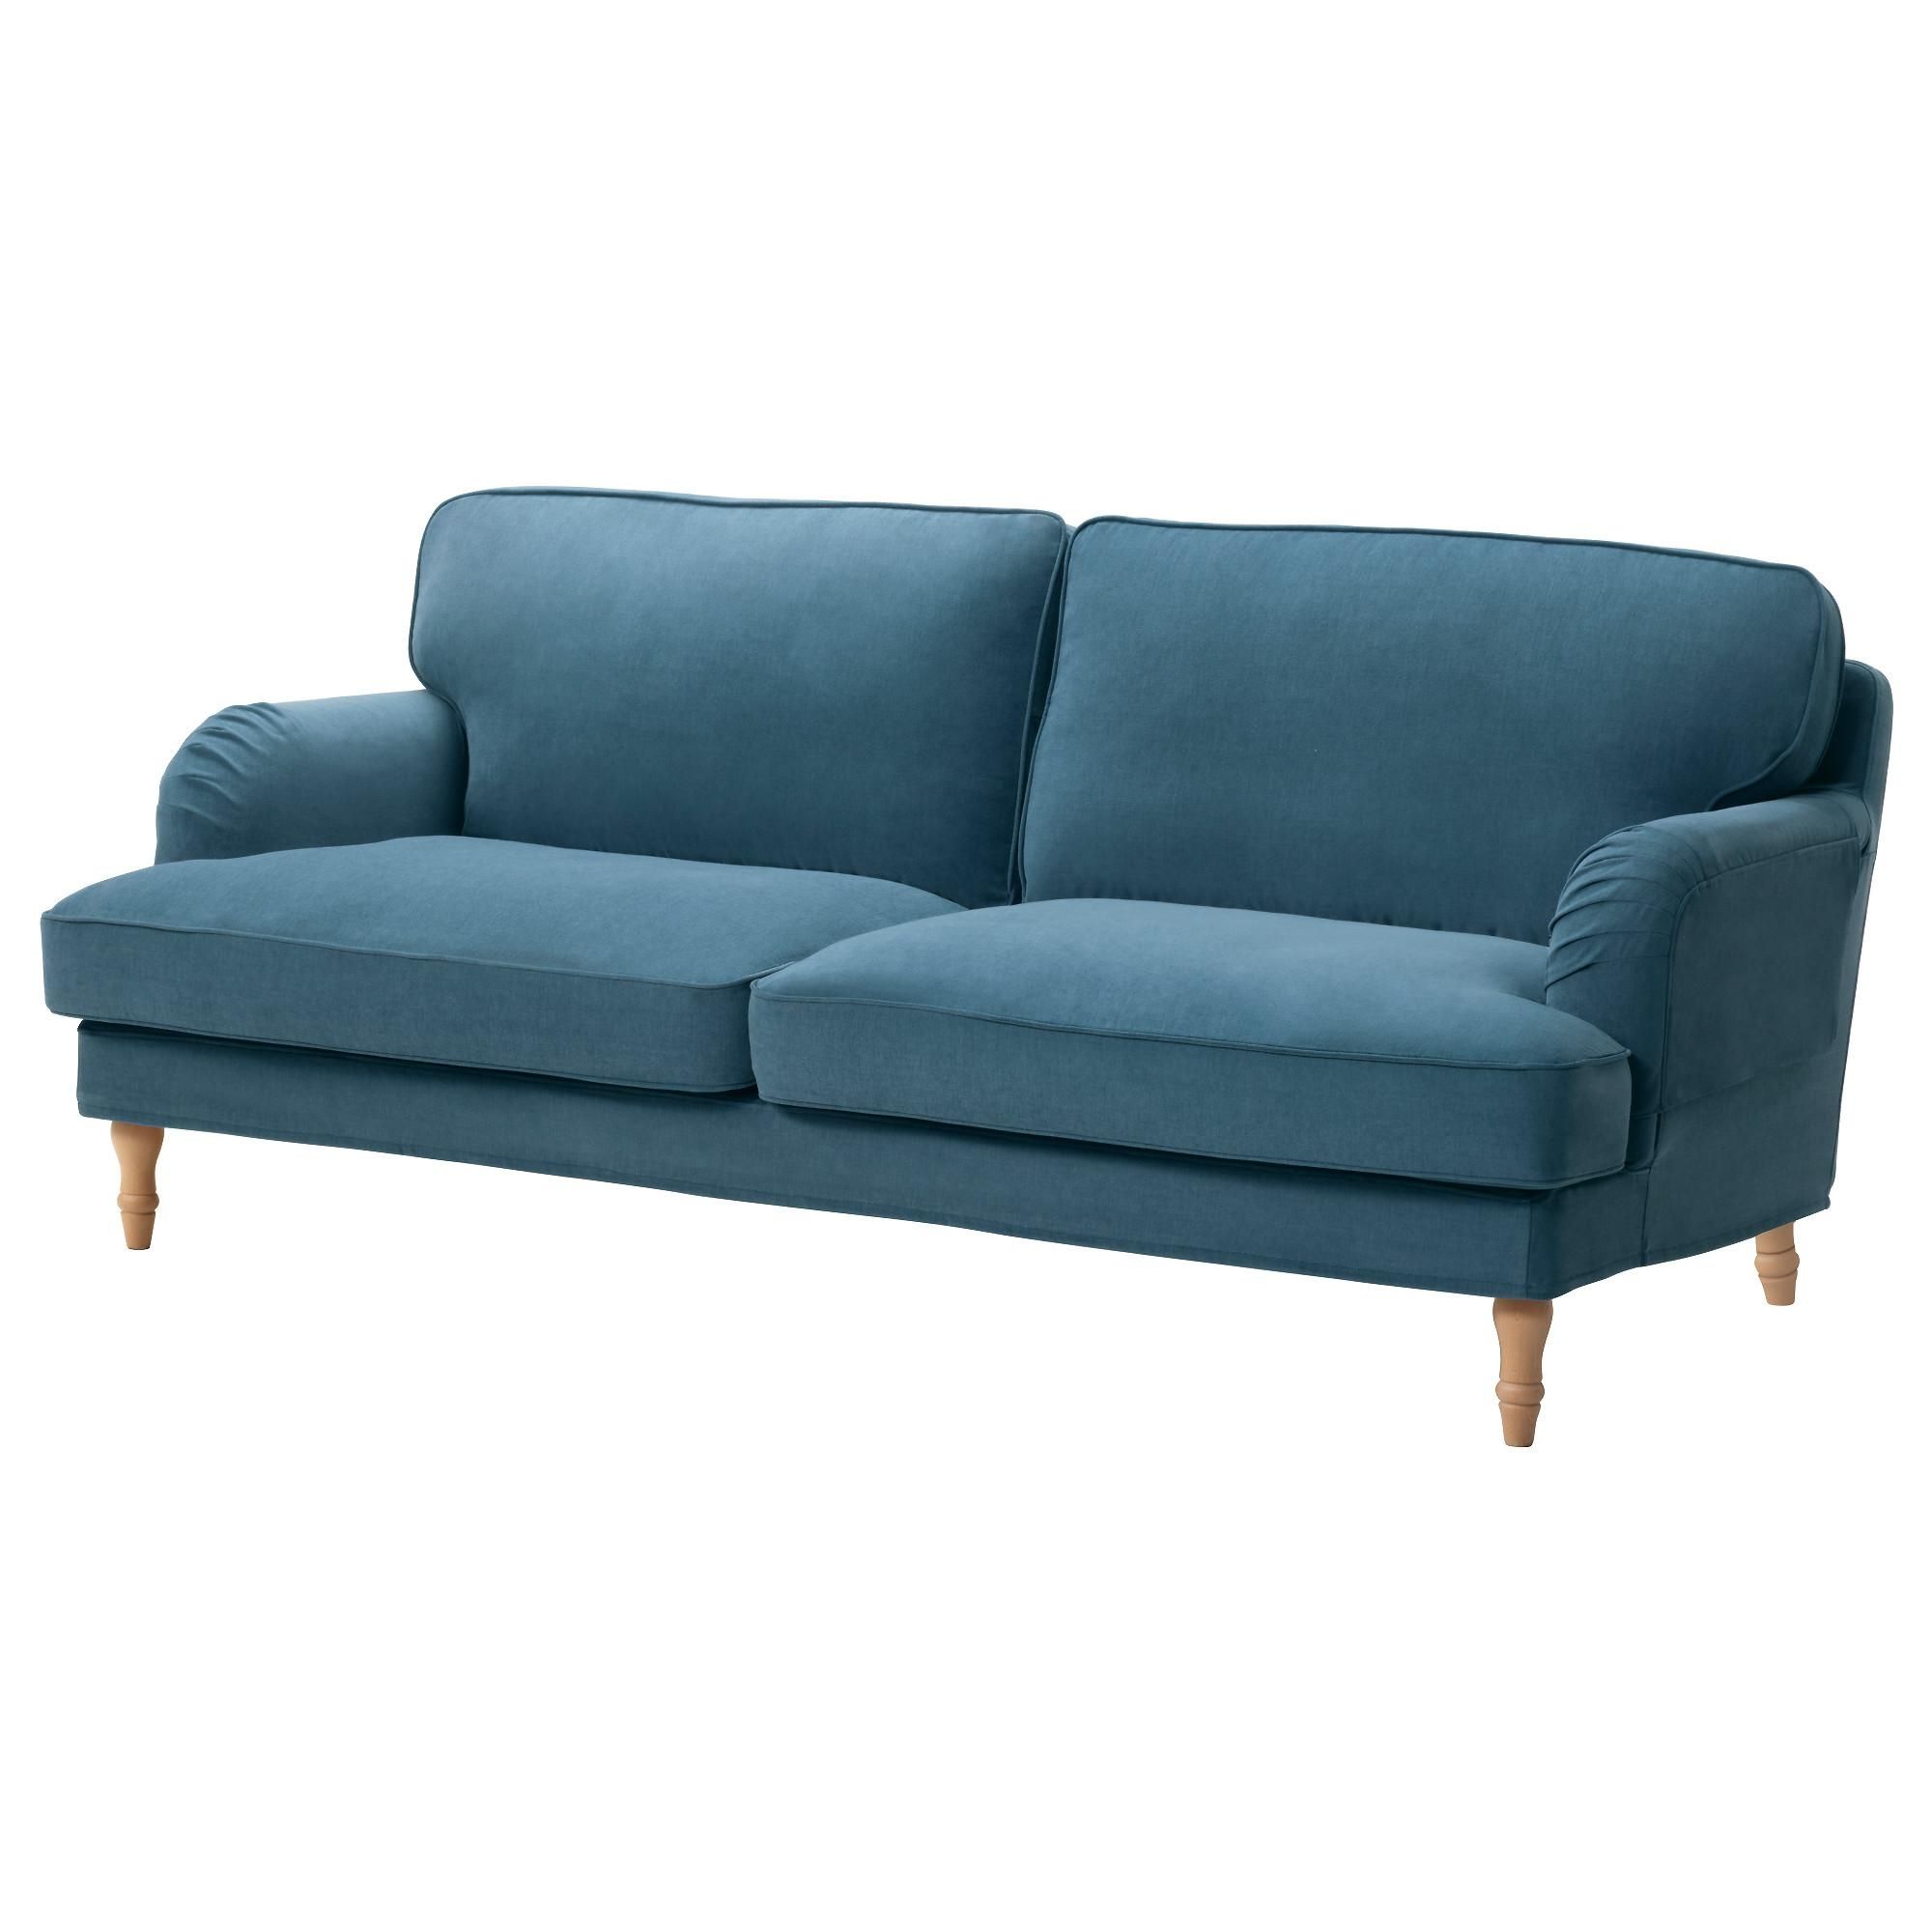 Stocksund Sofa – Ljungen Blue, Light Brown – Ikea Intended For Sofas (View 6 of 20)